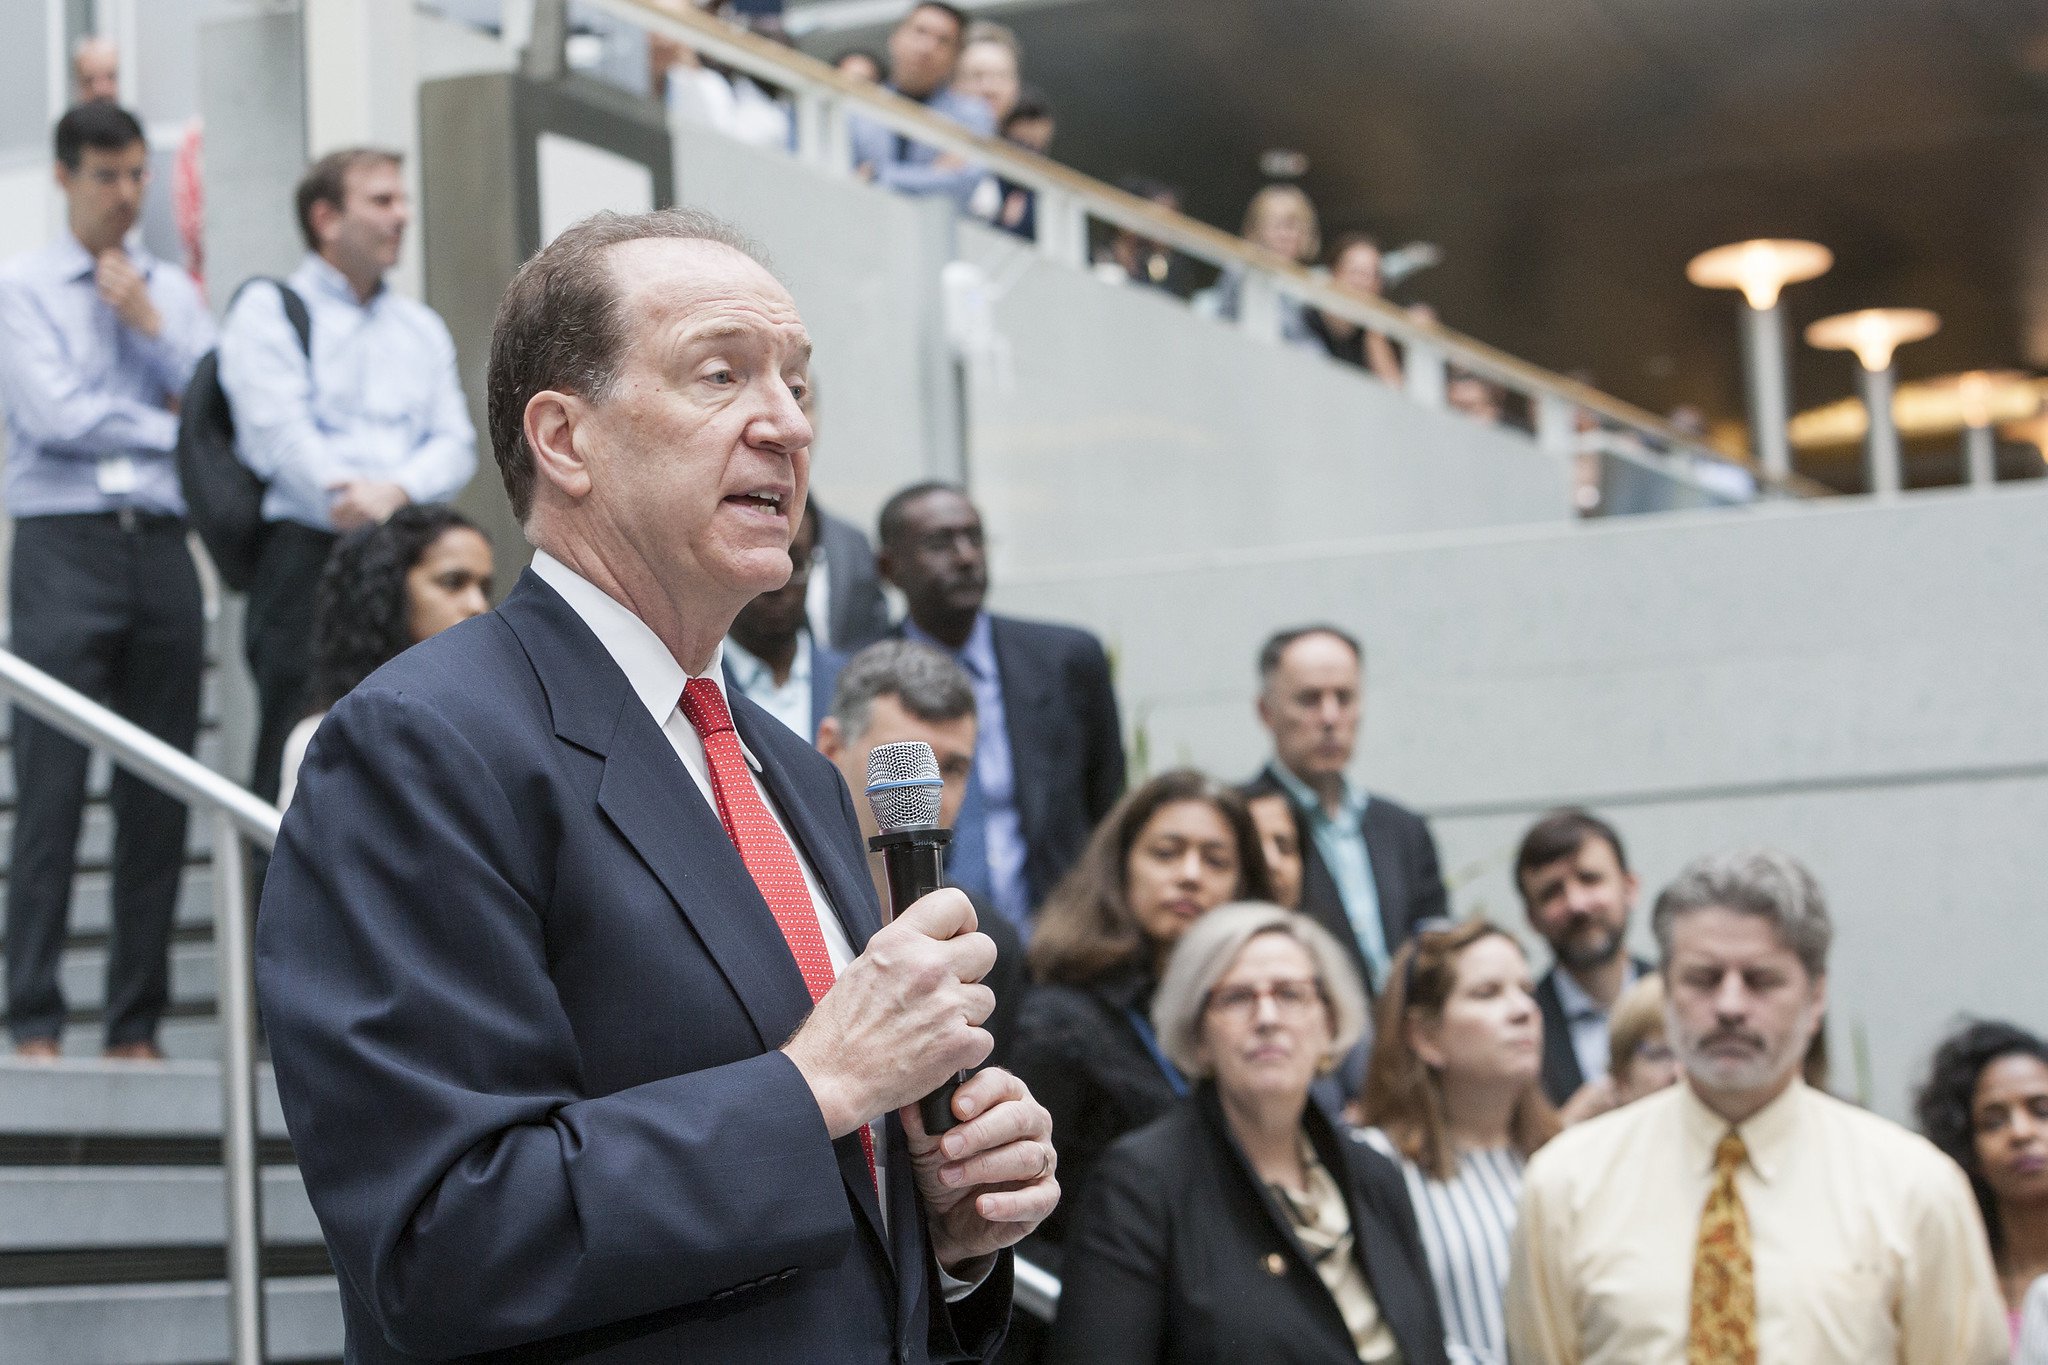 David Malpass, 13th President of World Bank Group, arrives on his first day of work, 9 April 2019. Photo credit: World Bank / Simone D. McCourtie CC BY-NC-ND 2.0 